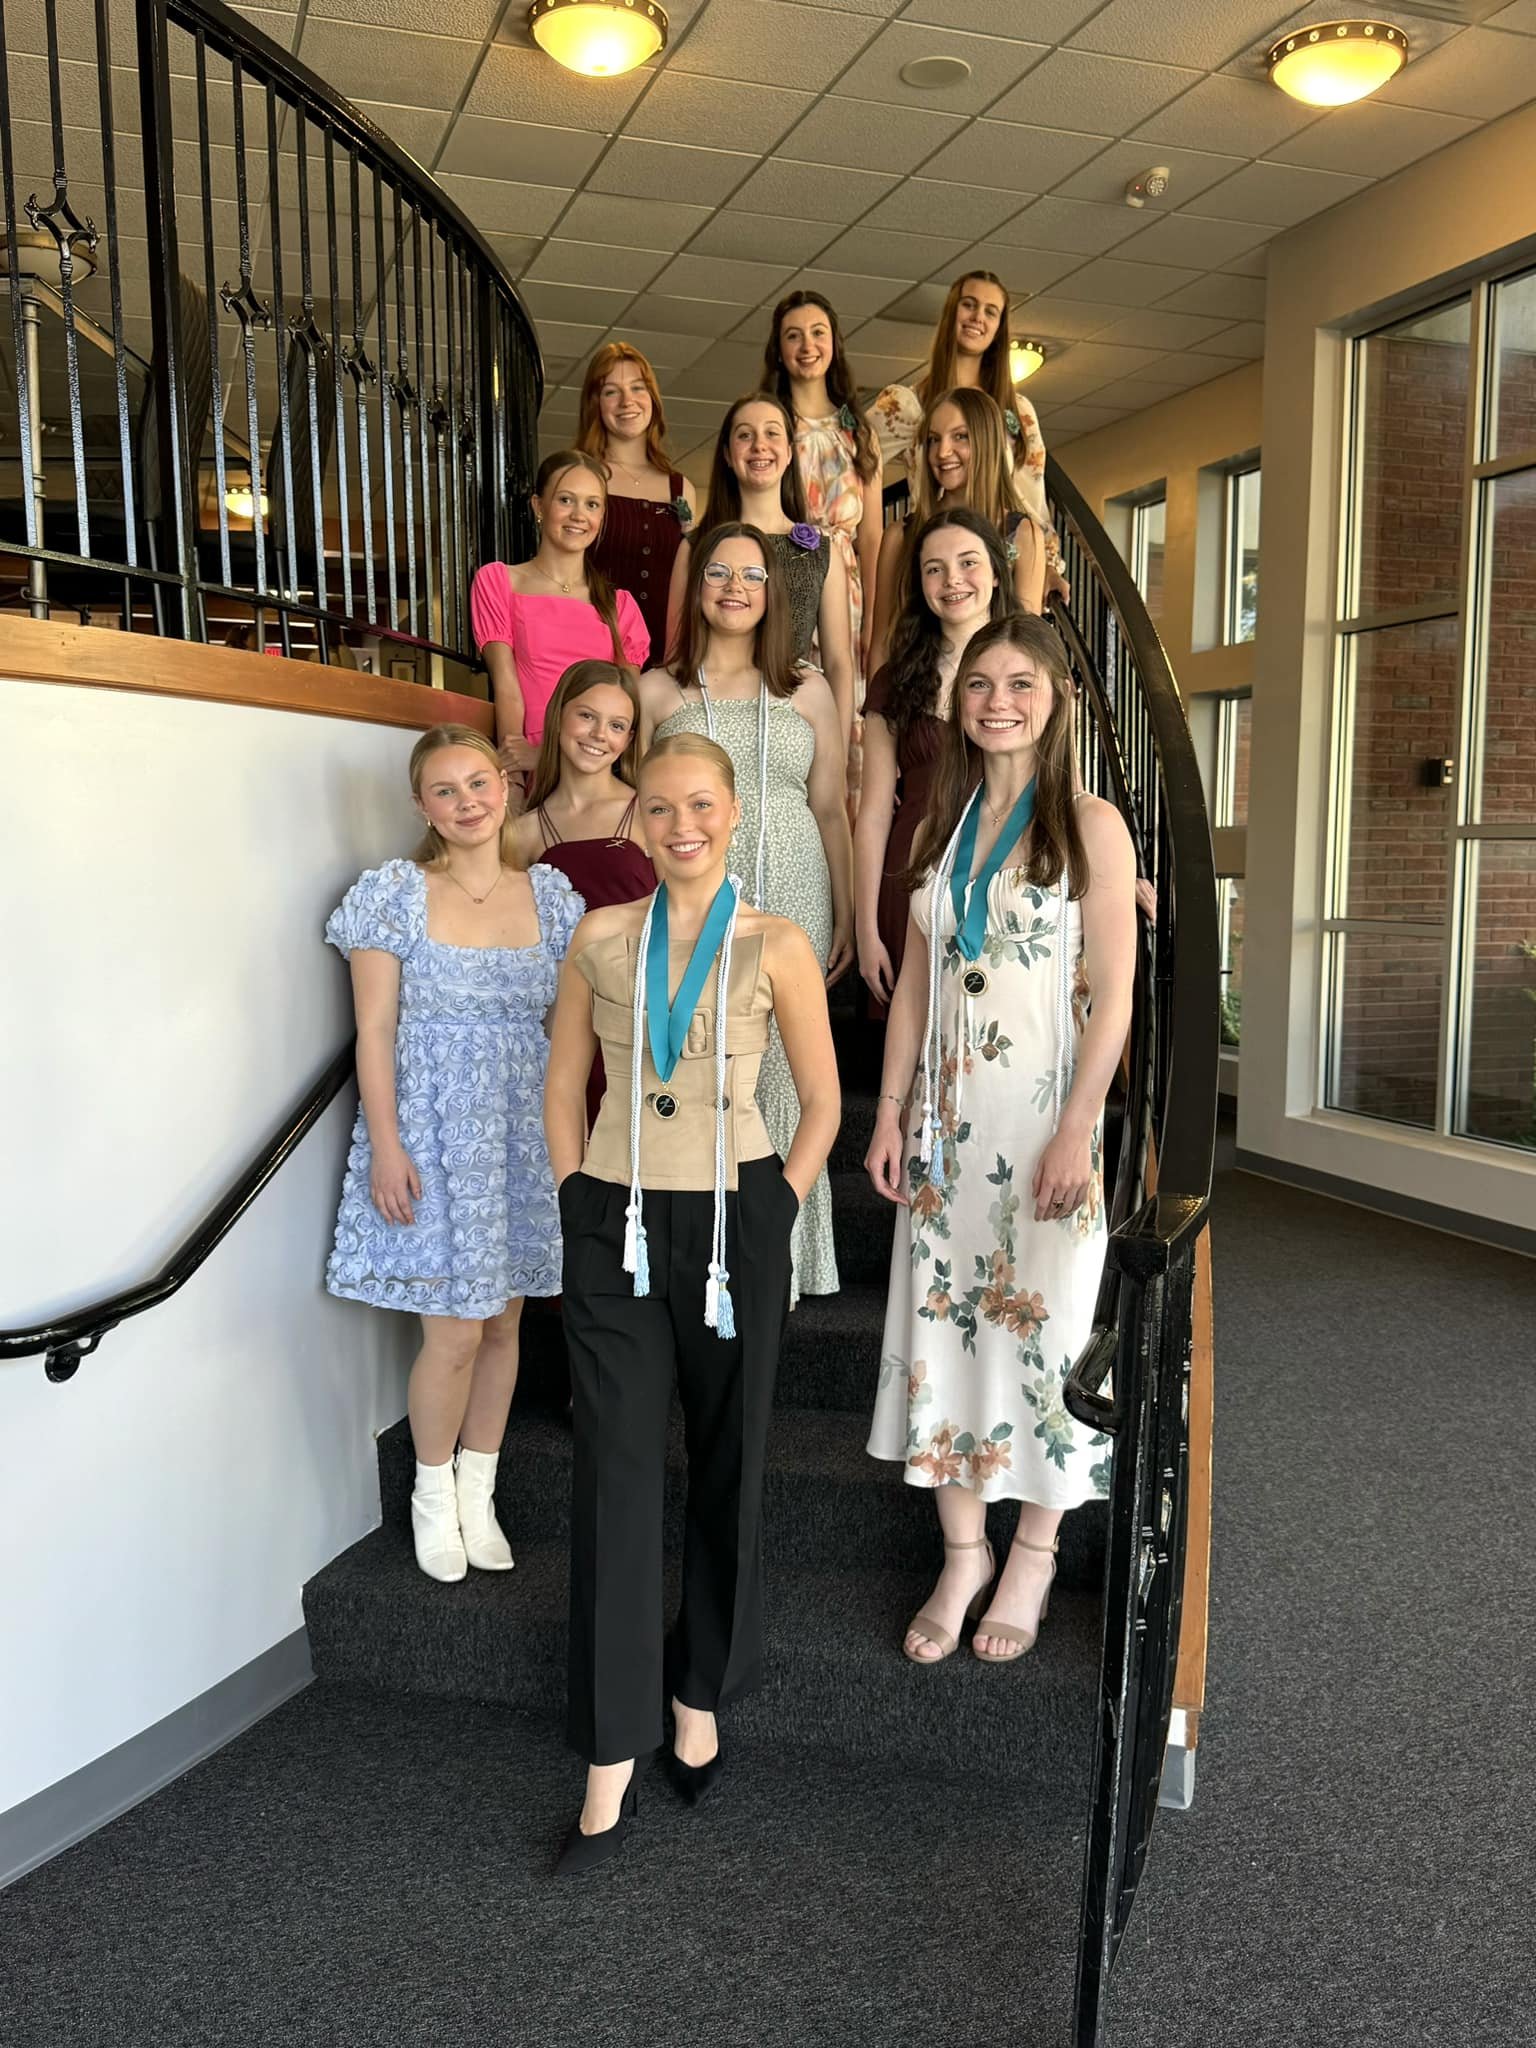 Congratulations to the SYPG dancers that were inducted to the Junior and Secondary chapter of the National Honor Society for Dance Arts. These students are recognized for their outstanding artistic merit, leadership and academic achievement in dance.